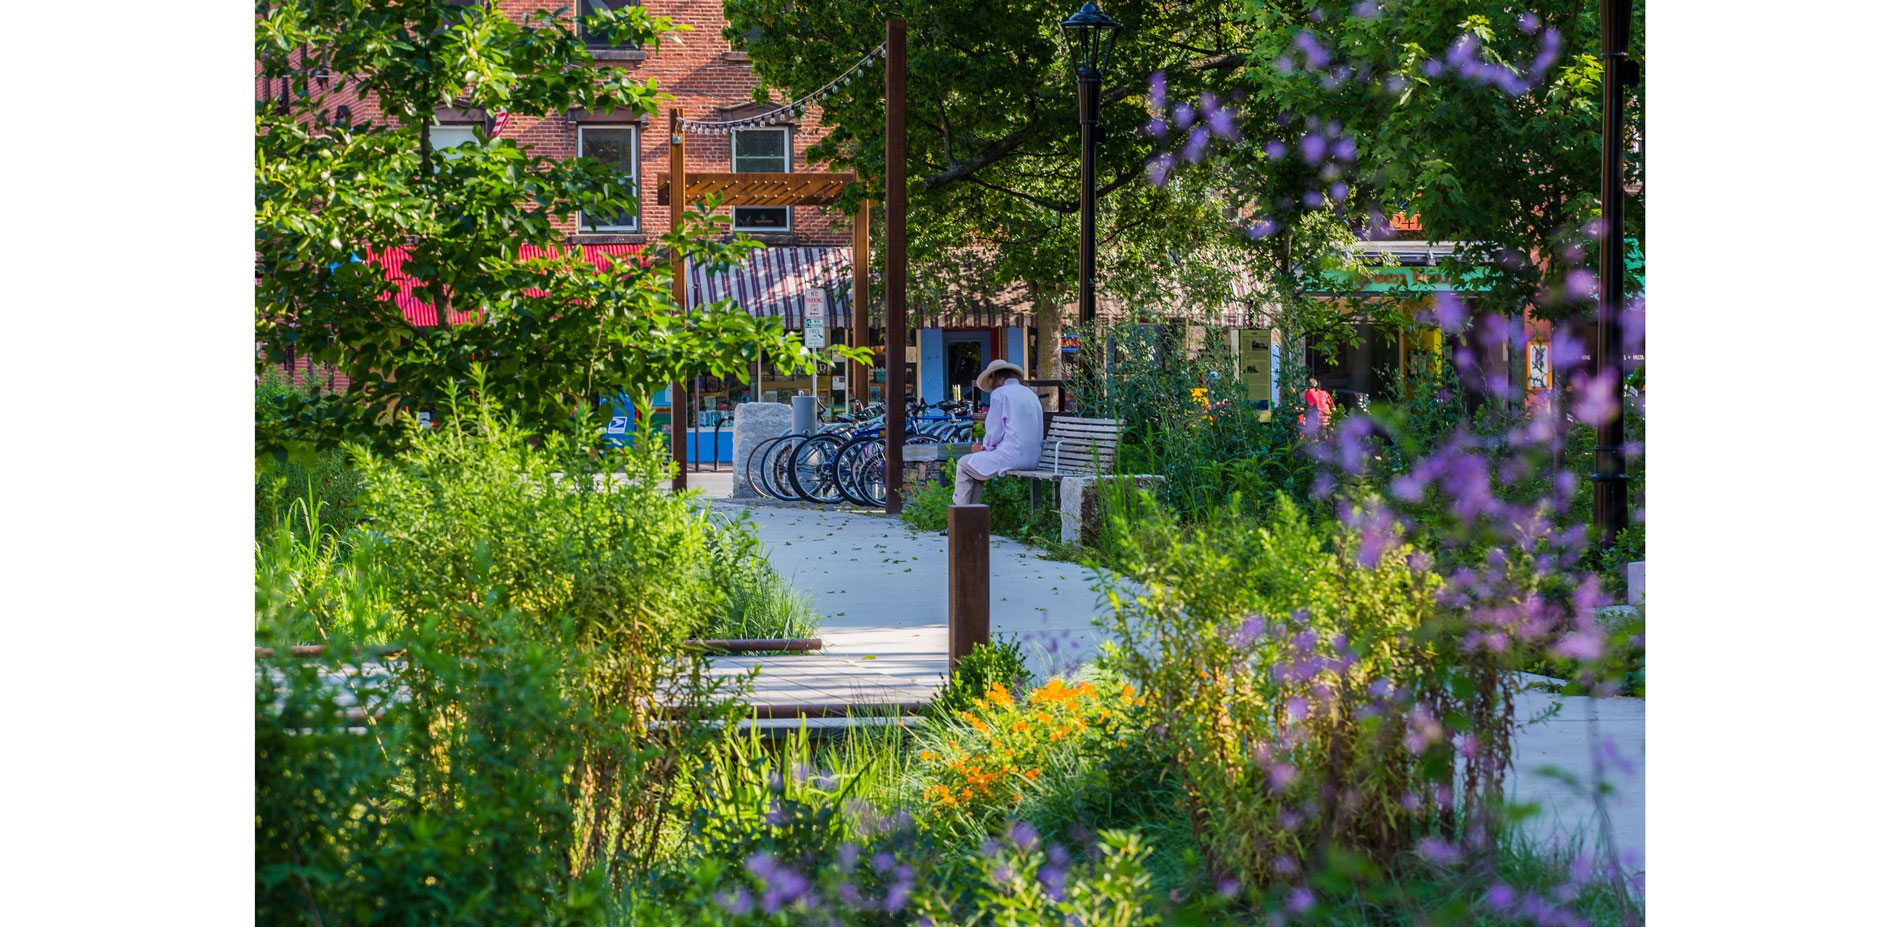 The bioswale is a garden that has increased opportunities for urban wildlife.
                            Flowering perennials like Aster, Butterfly Weed and Meadow Rue bring se…